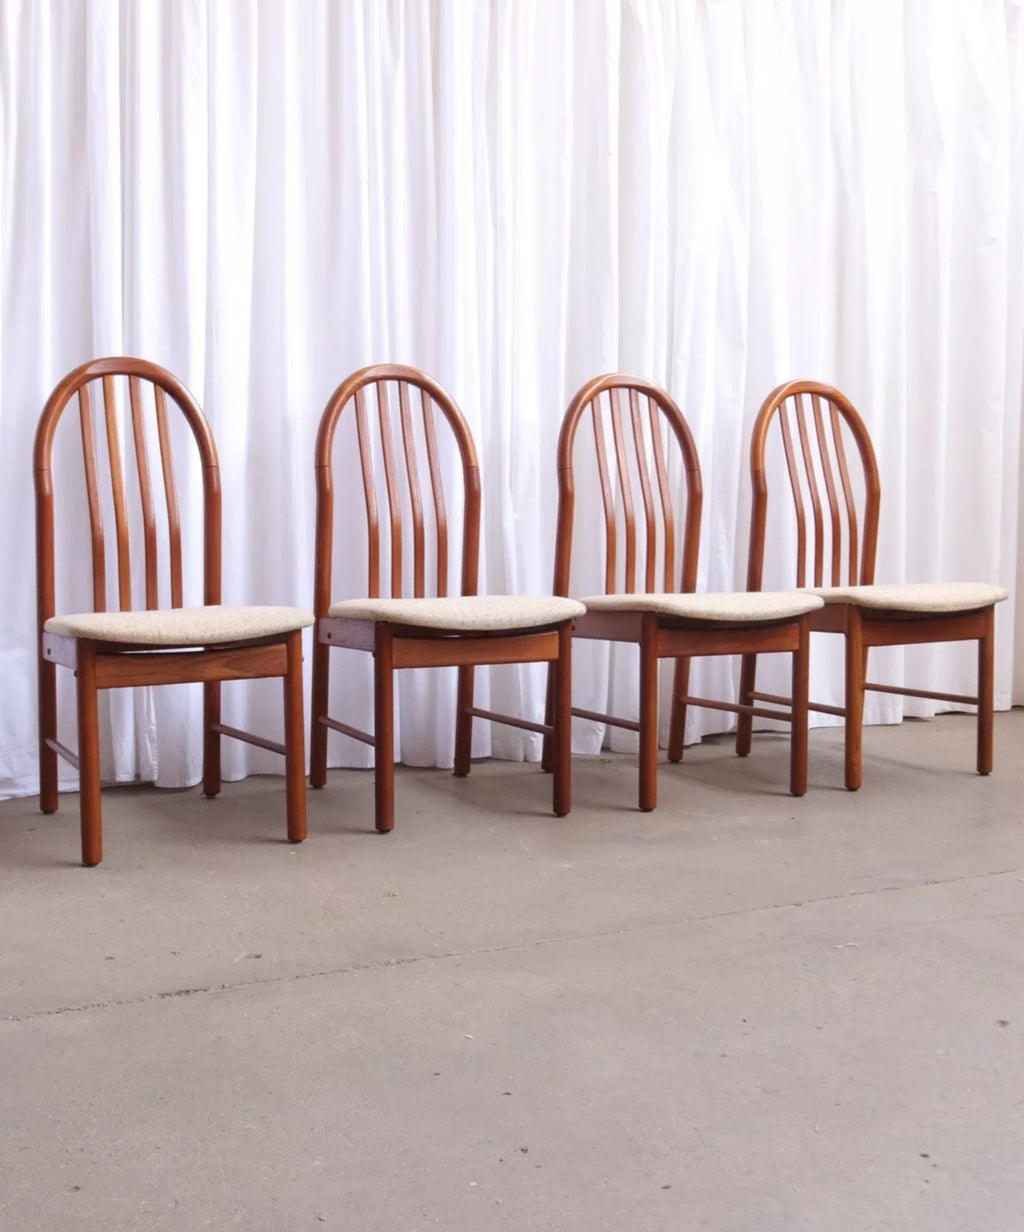 Benny Linden 1960s Teak Dining Chairs Set Of 4 Immaculate Condition Danish - teakyfinders